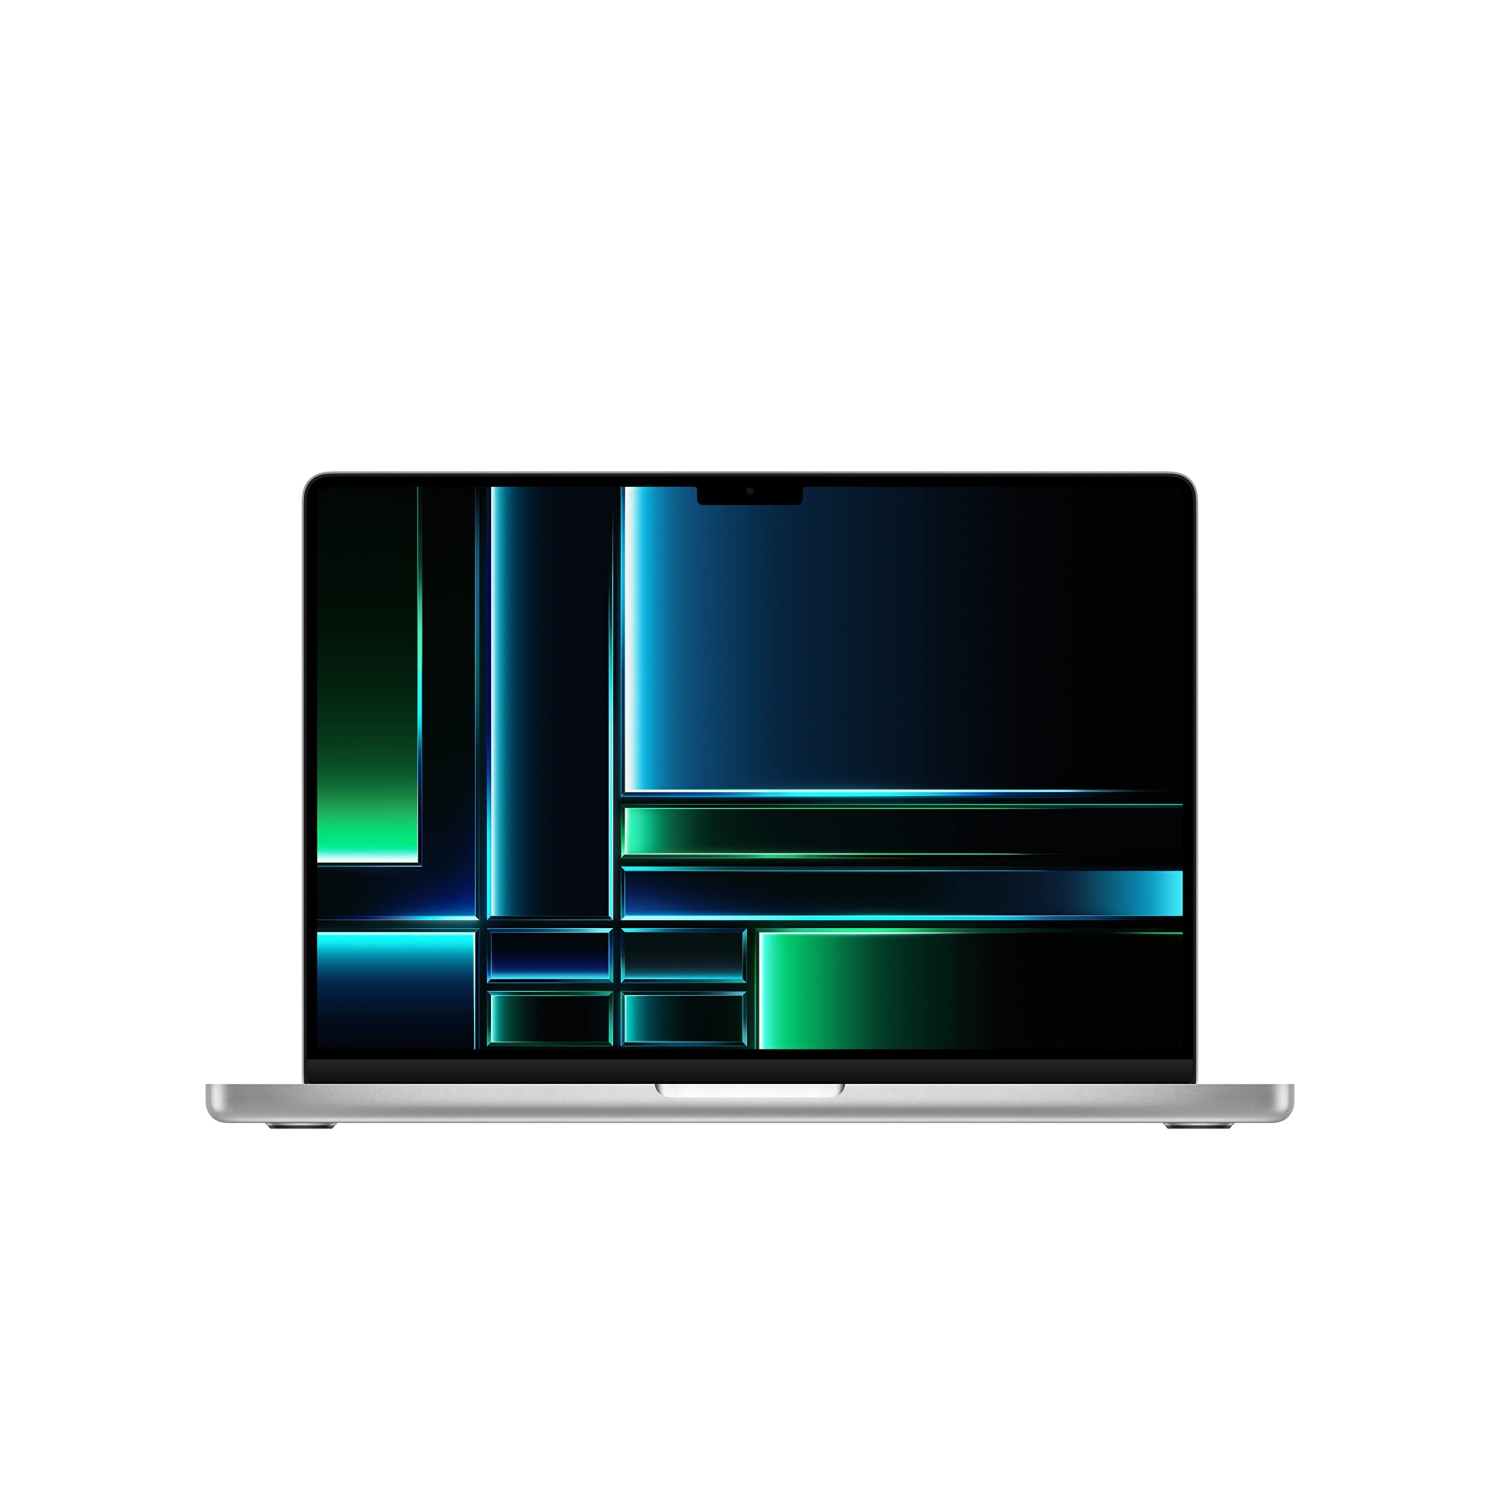 Refurbished (Excellent) - Apple 2023 MacBook Pro Laptop M2 Pro chip with 10‑core CPU and 16‑core GPU: 14.2-inch Liquid Retina XDR Display, 16GB Unified Memory, 512GB SSD Storage. W